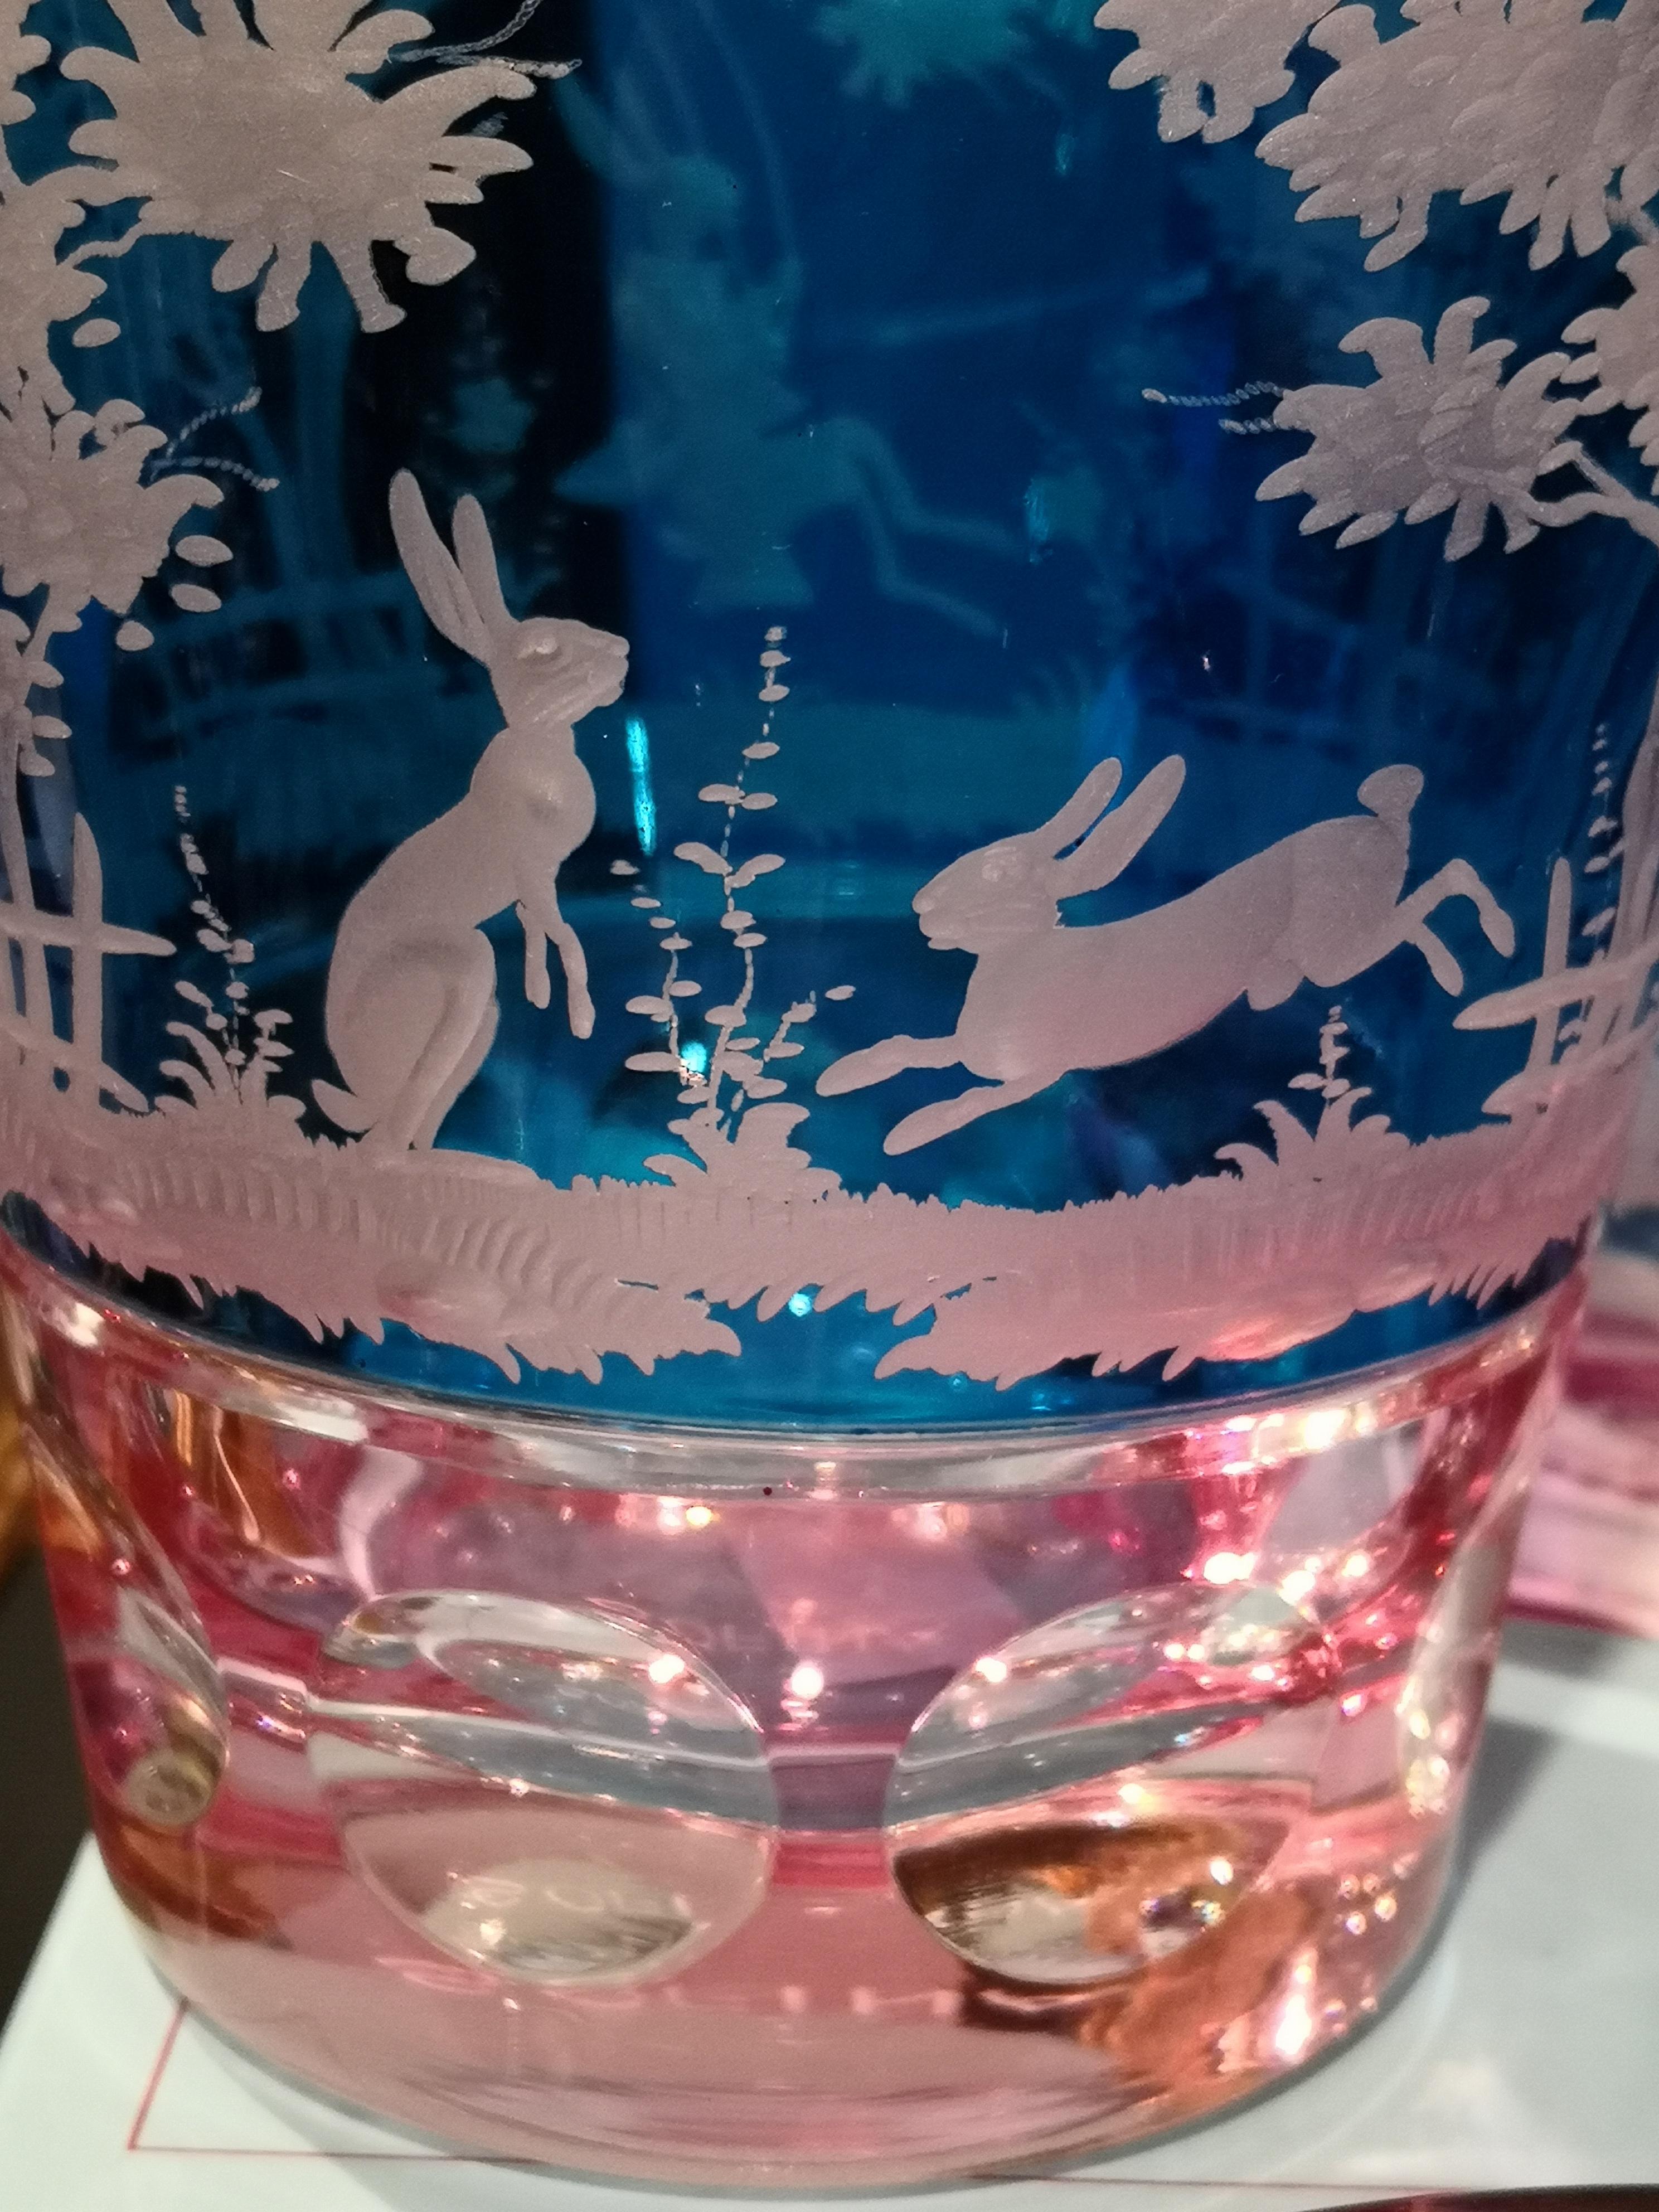 Hand blown crystal vase in blue and pink glass with hand-edged Easter garland all around. The decor shows Easter bunnies and flowers all around. Completely hand blown and hand-engraved in Bavaria Germany. The glass here shown comes in intense blue